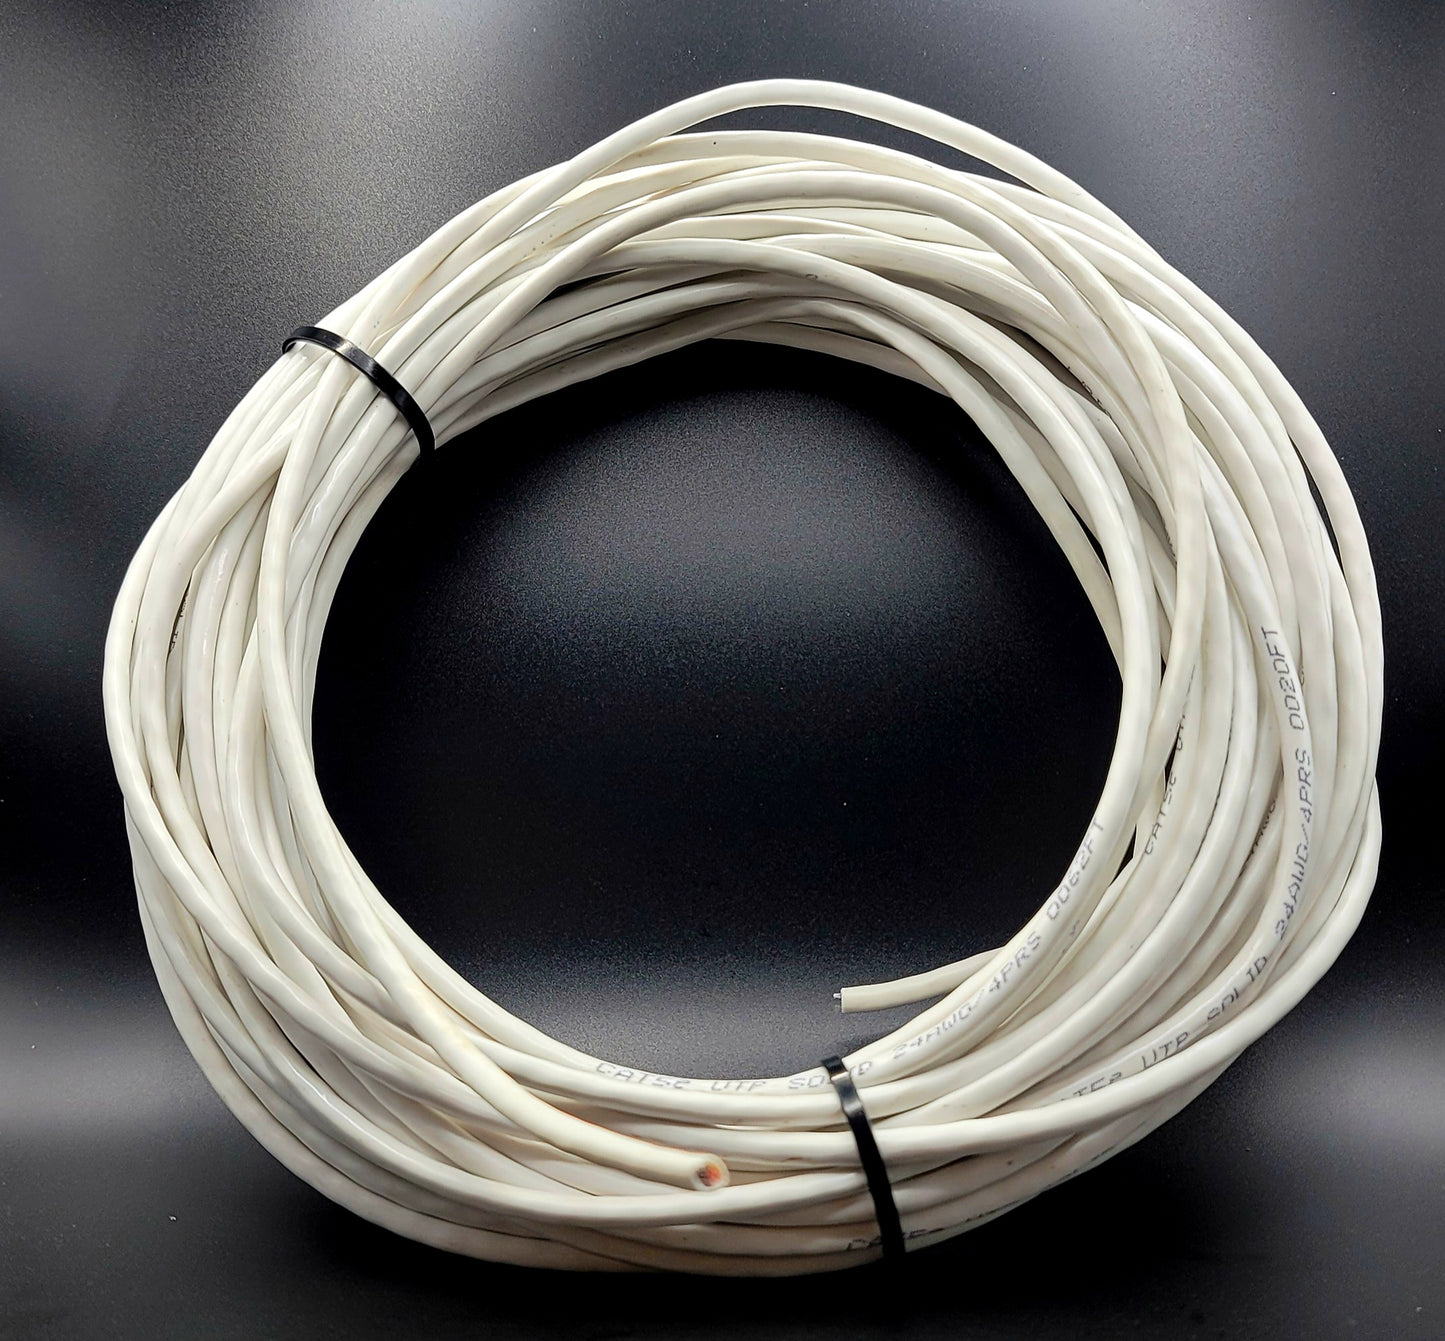 Totality Depot Bulk CAT6 Cable Indoor/Outdoor Solid Copper Ethernet Lan CCTV 10/100/1000mb CMP 330ft 99m White